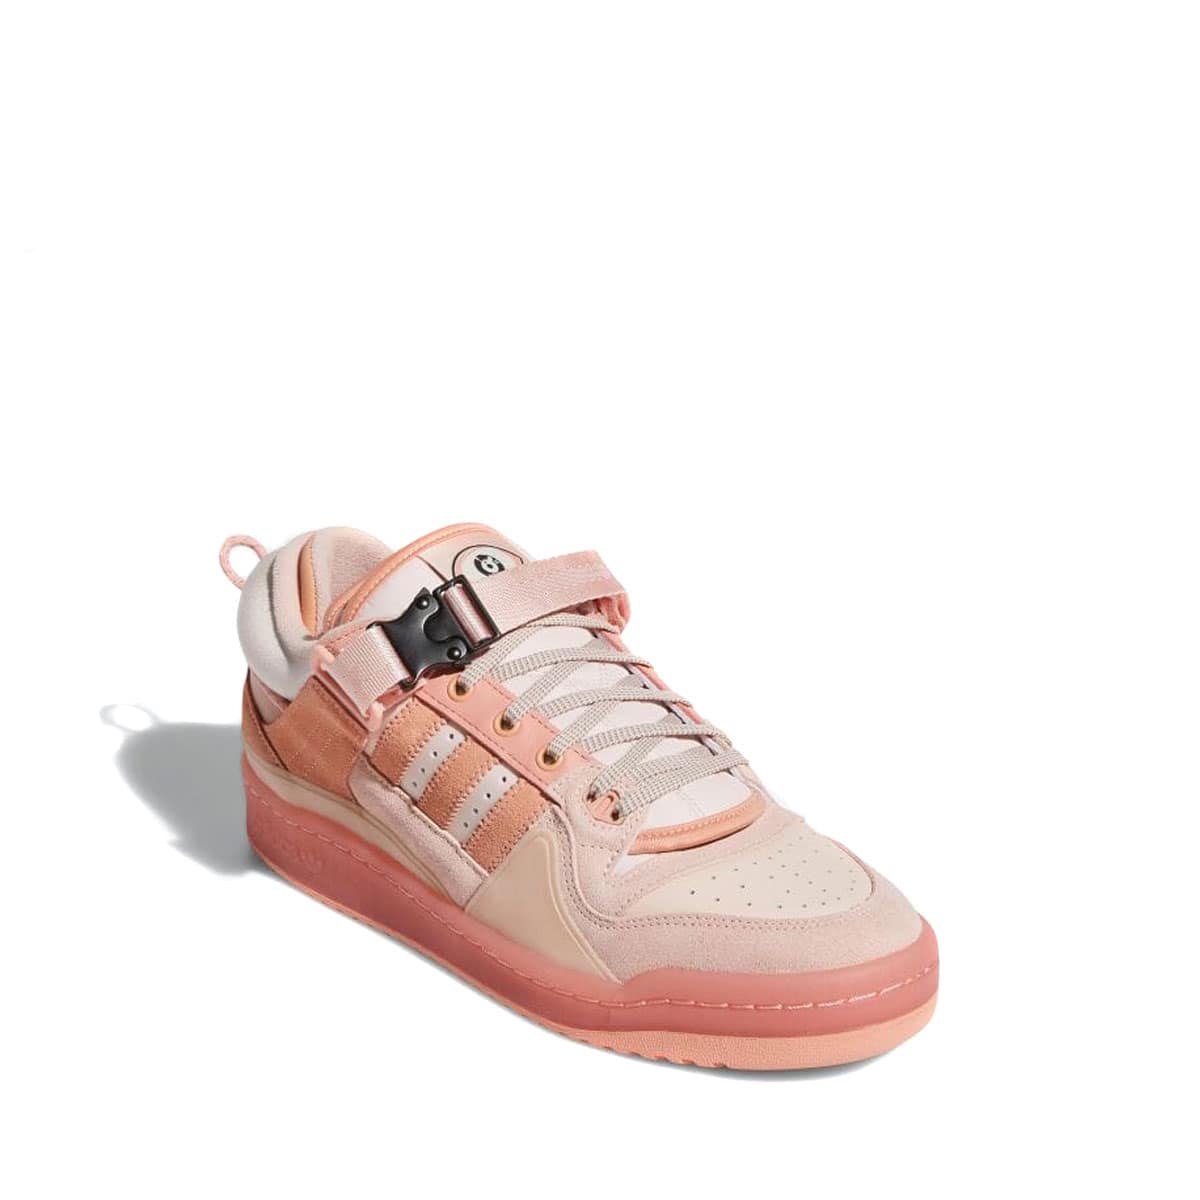 adidas BAD BUNNY FORUM THE FIRST CAFE SUPPLY COLOR/SUPPLY COLOR/SUPPLY COLOR 21SS-I